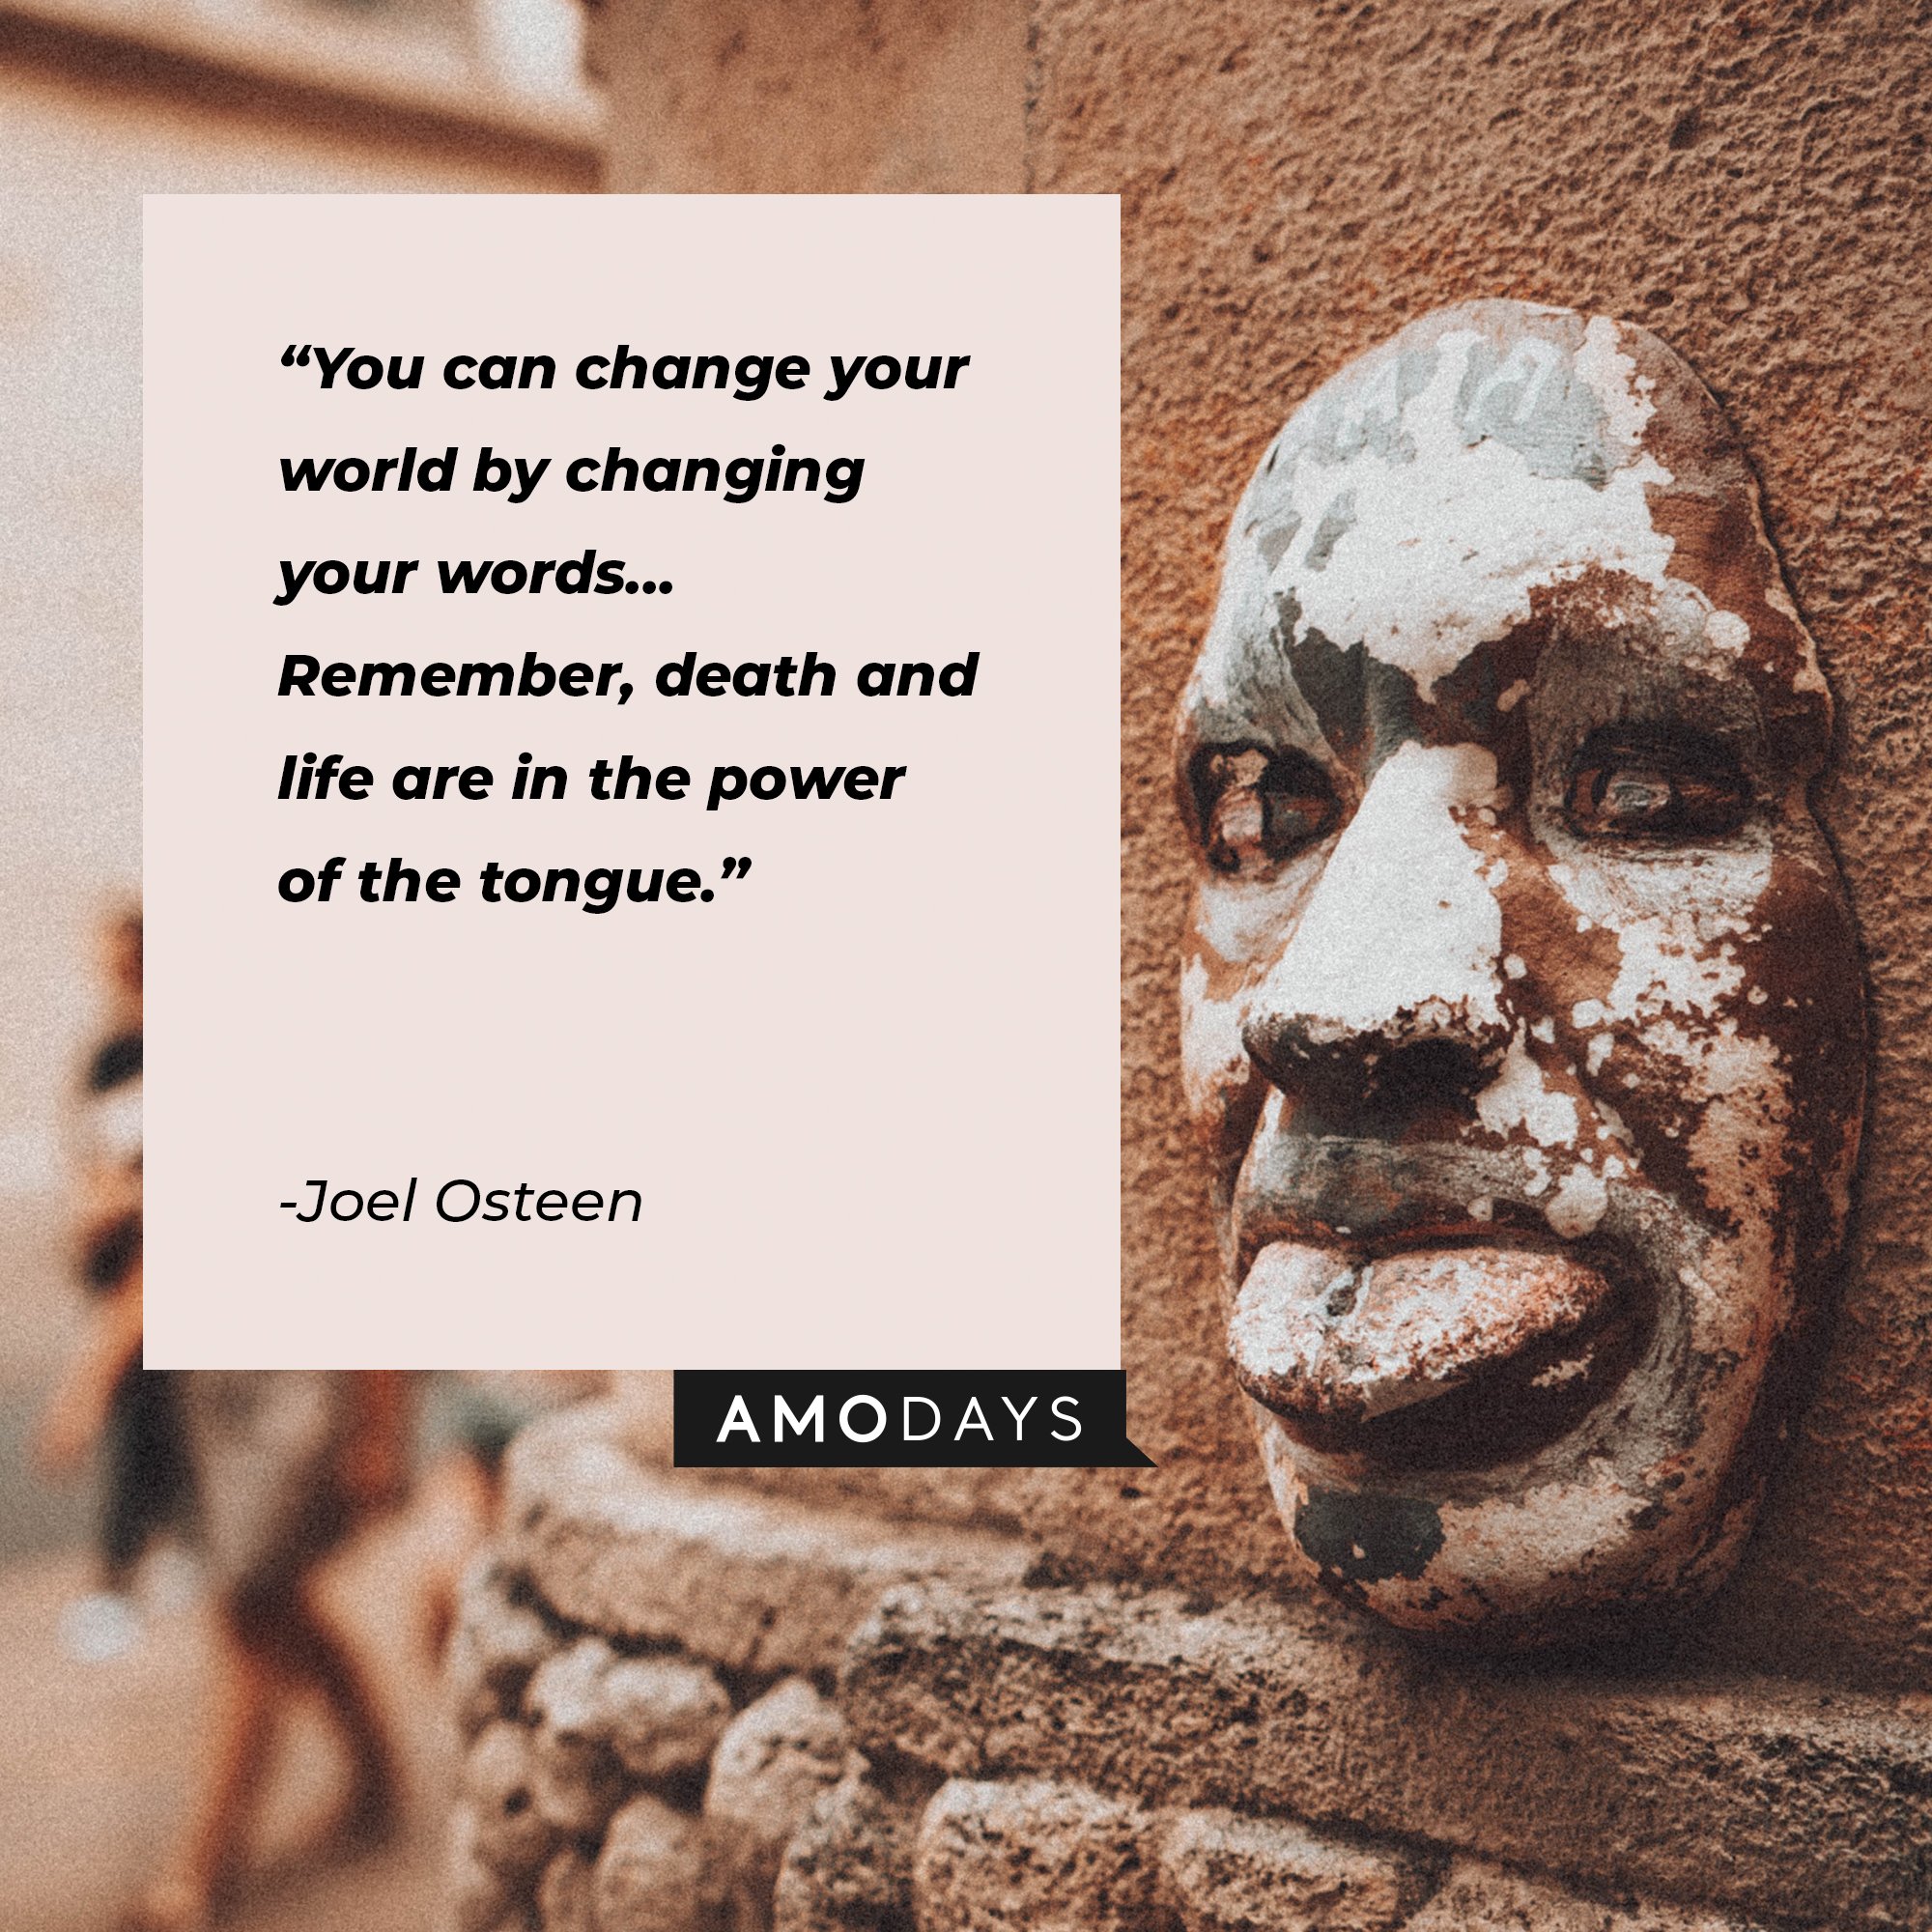 Joel Osteen's quote: “You can change your world by changing your words... Remember, death and life are in the power of the tongue.” | Image: AmoDays